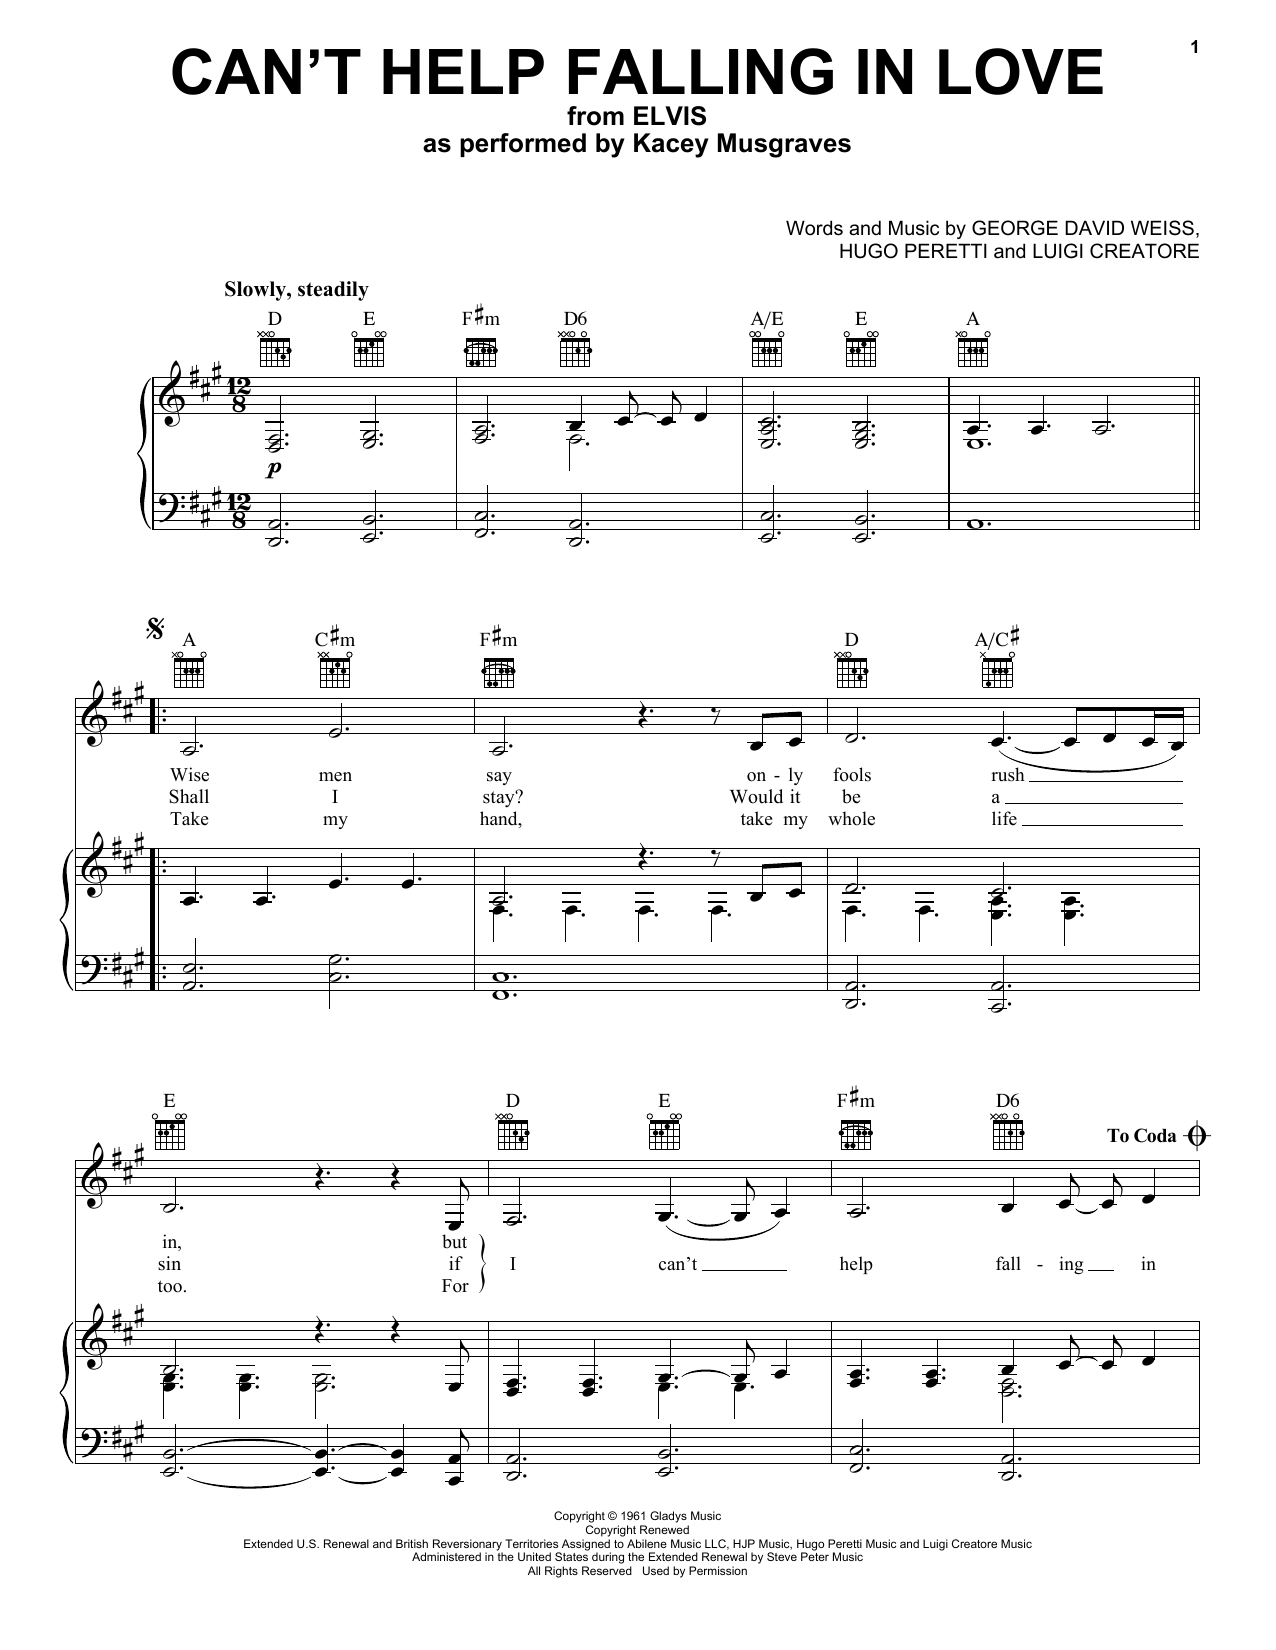 Kacey Musgraves Can't Help Falling In Love (from ELVIS) sheet music notes and chords. Download Printable PDF.